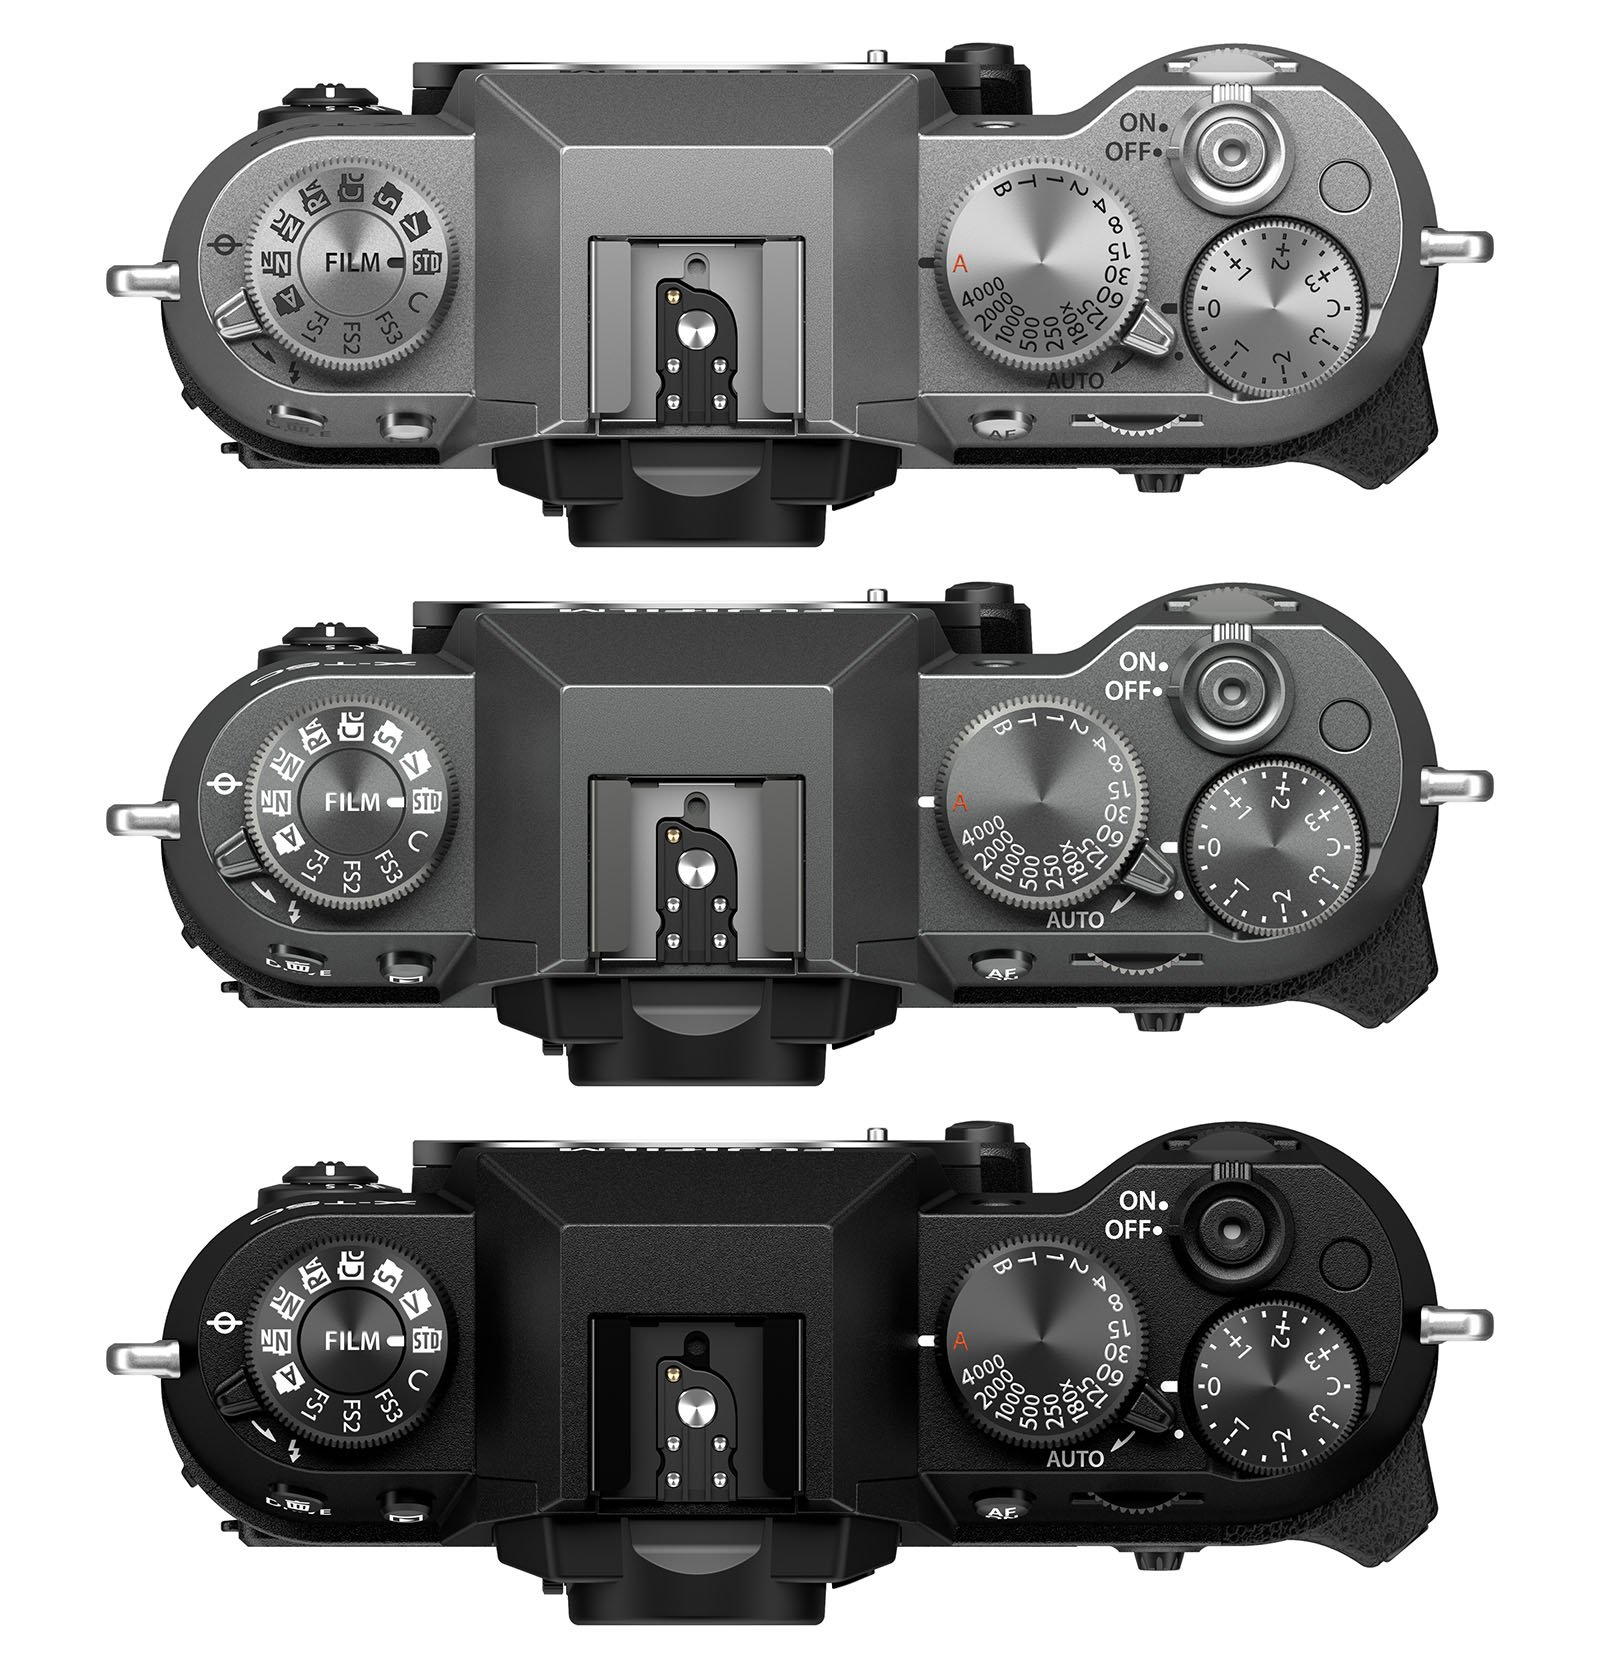 Top view of three digital camera bodies aligned vertically. Each camera has various dials and buttons for settings, such as on/off switches, mode dials, and exposure compensation dials. The cameras are similar in design but have distinct differences in controls and features.